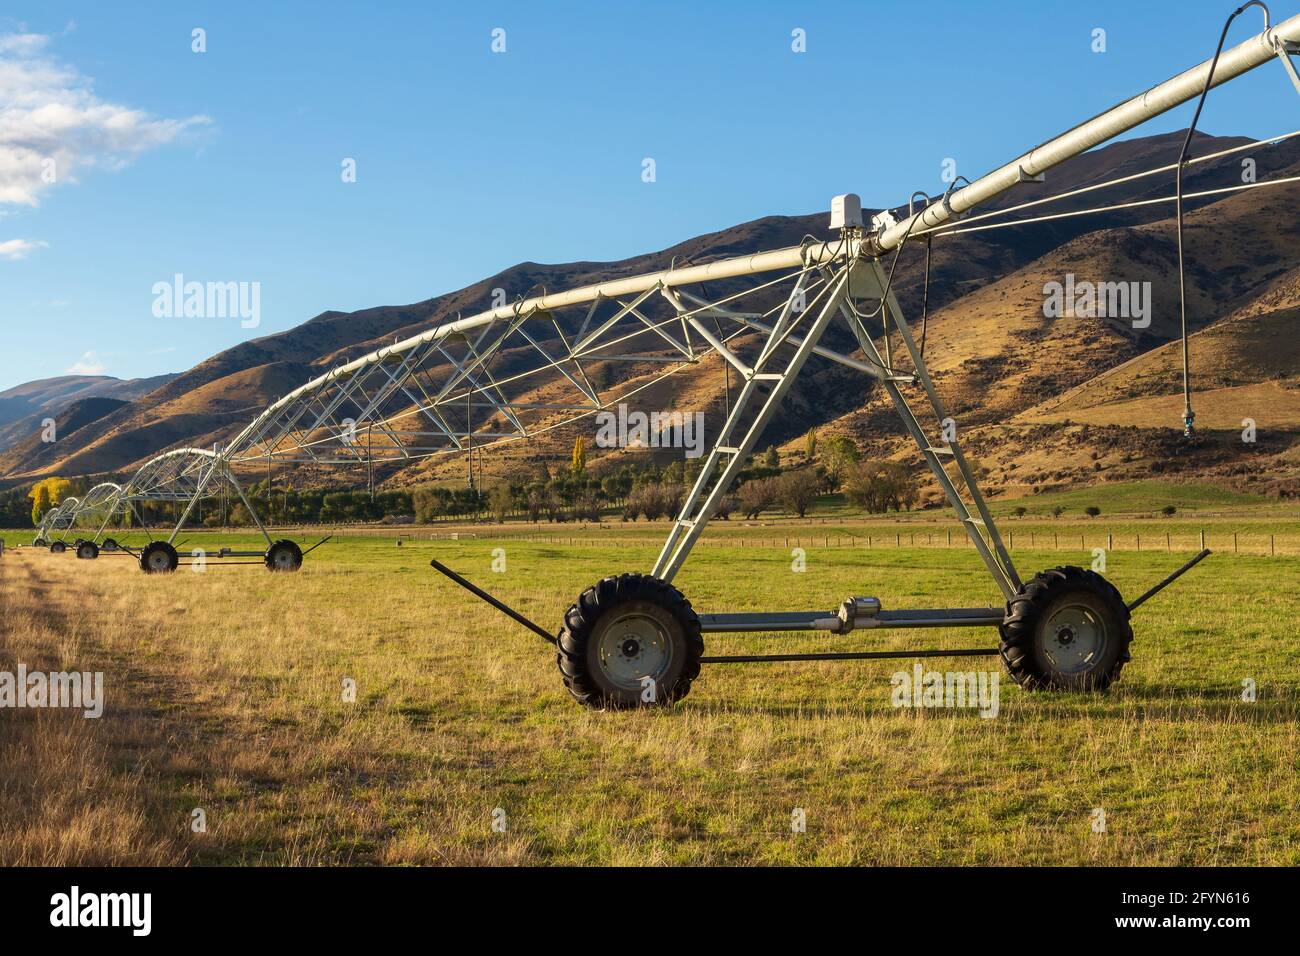 A center pivot farm irrigation system stretching off into the distance. Photographed in the Otago region of New Zealand's South Island Stock Photo